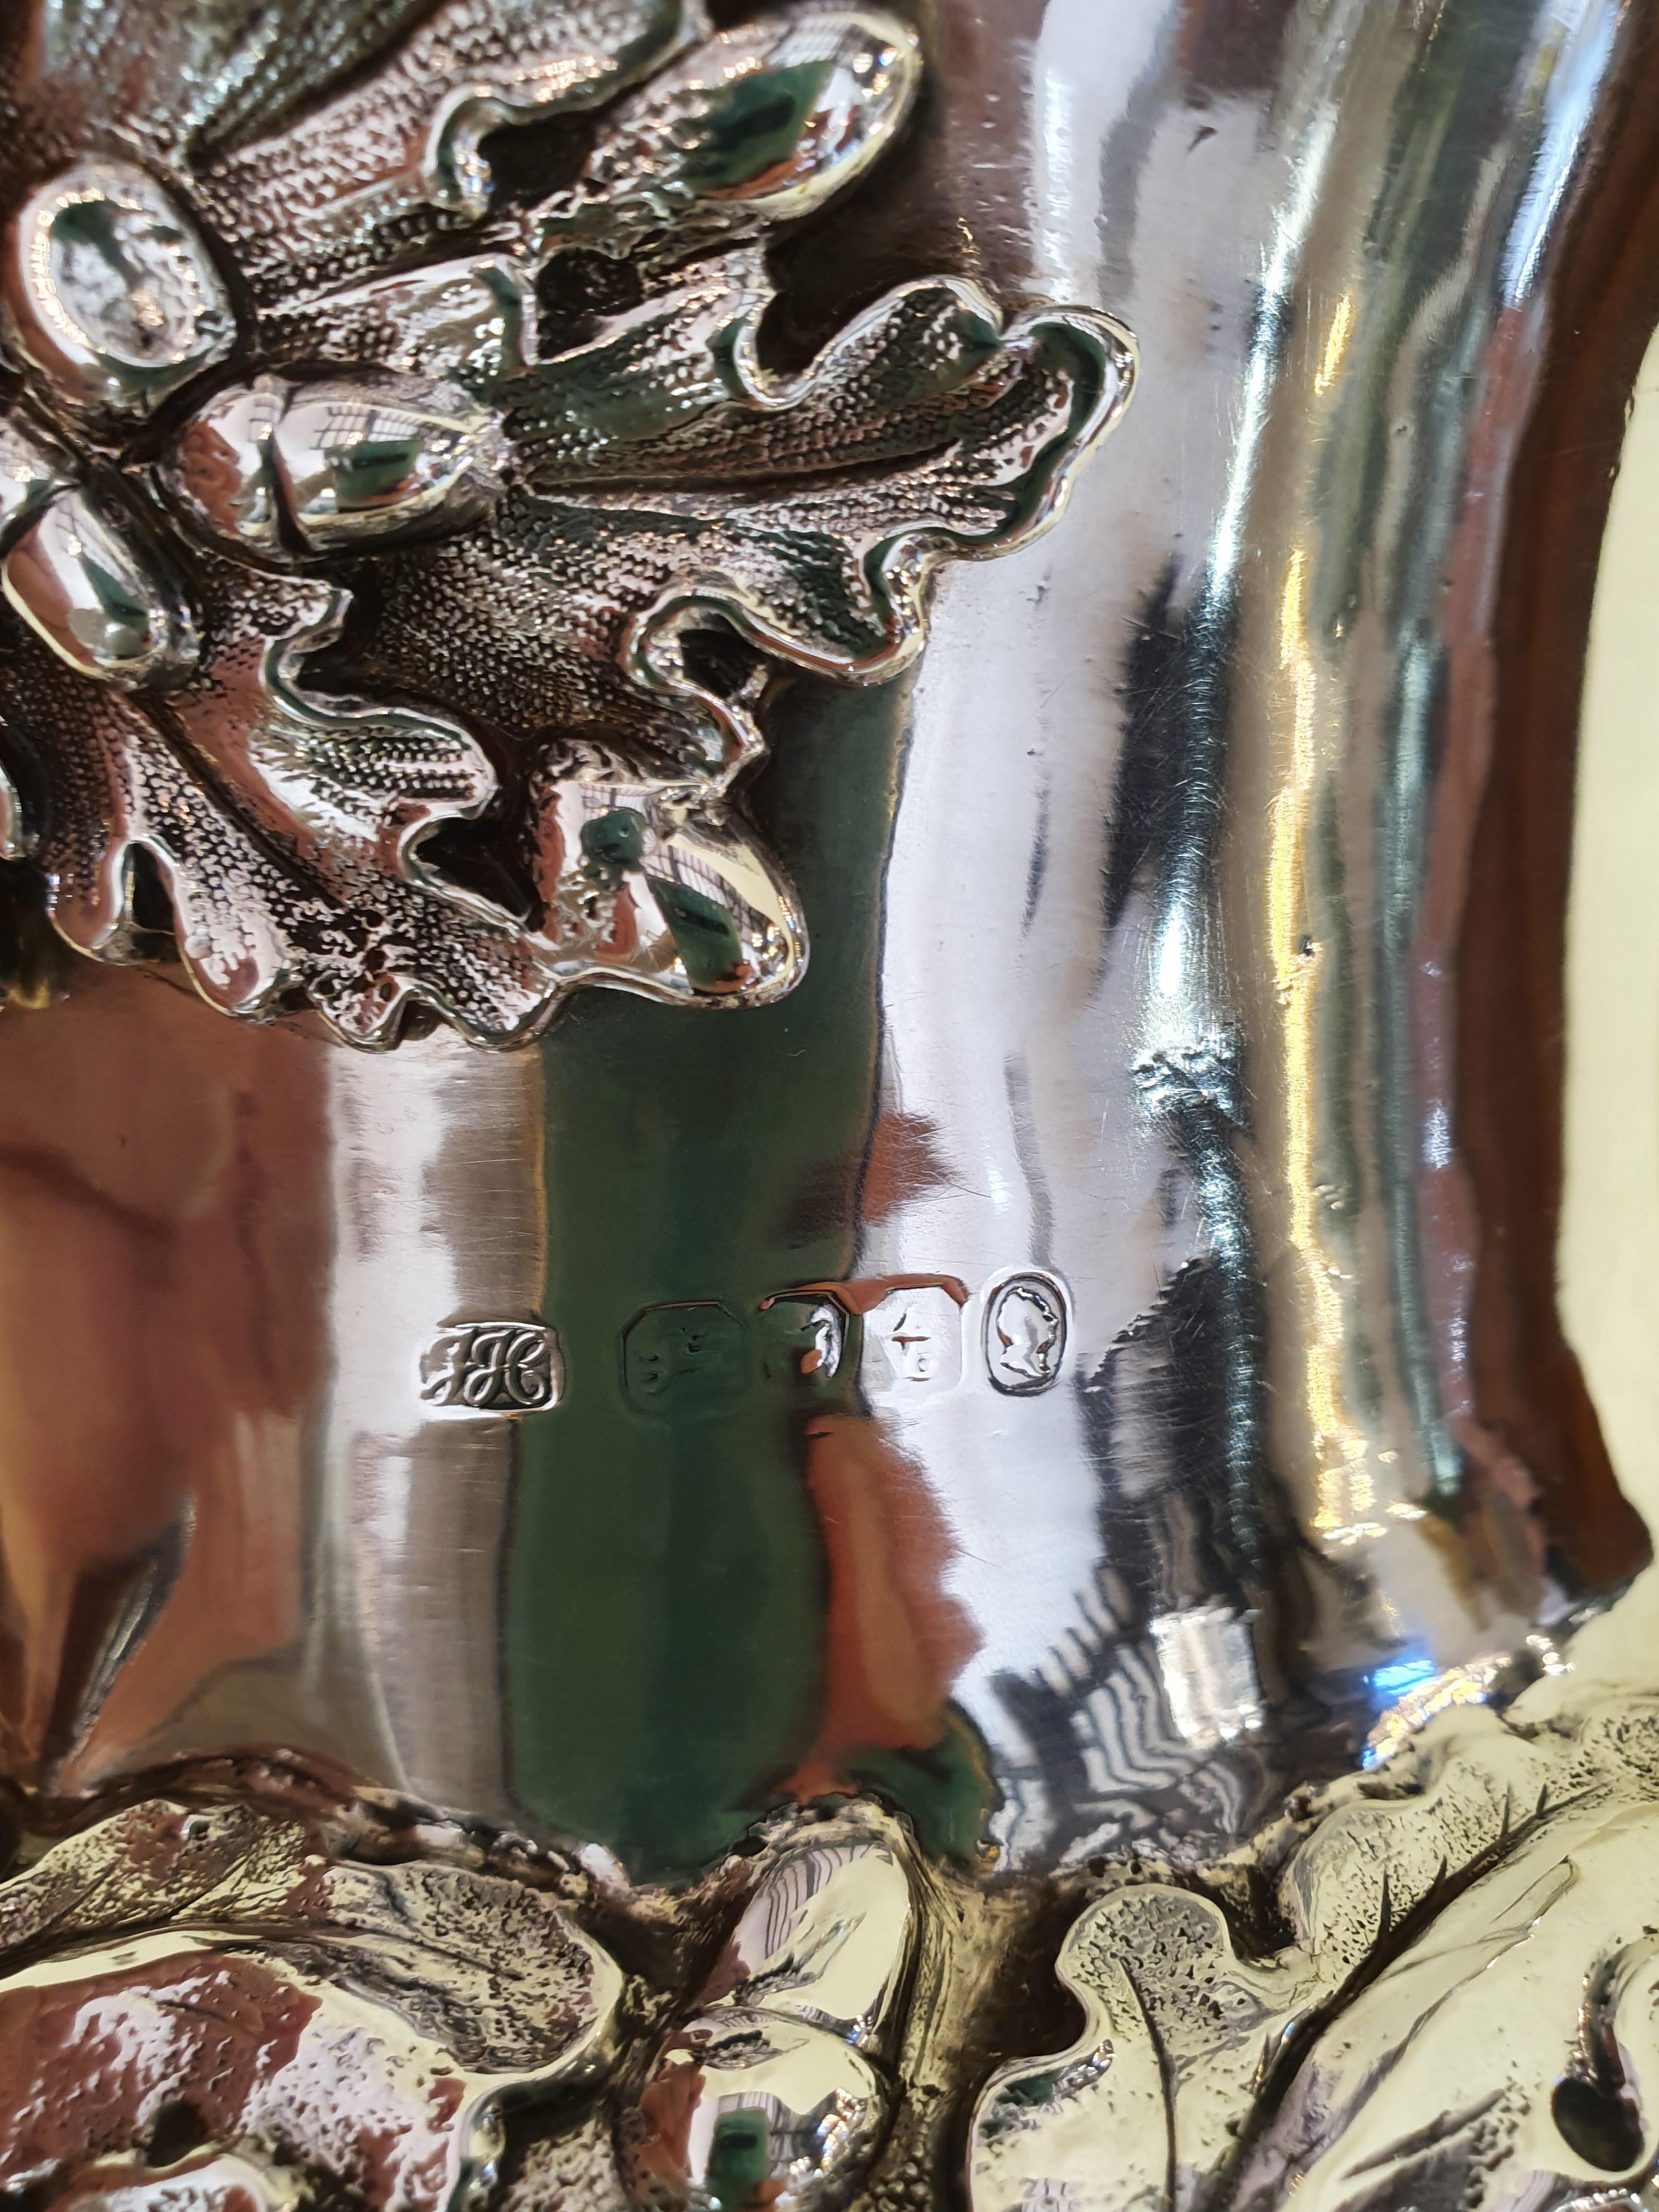 A fine and impressive antique William IV English sterling silver presentation cup by Jason Hobbs.
This presentation cup has a Campania form onto a knopped pedestal to a circular spreading foot
The lower portion of the body is ornamented with